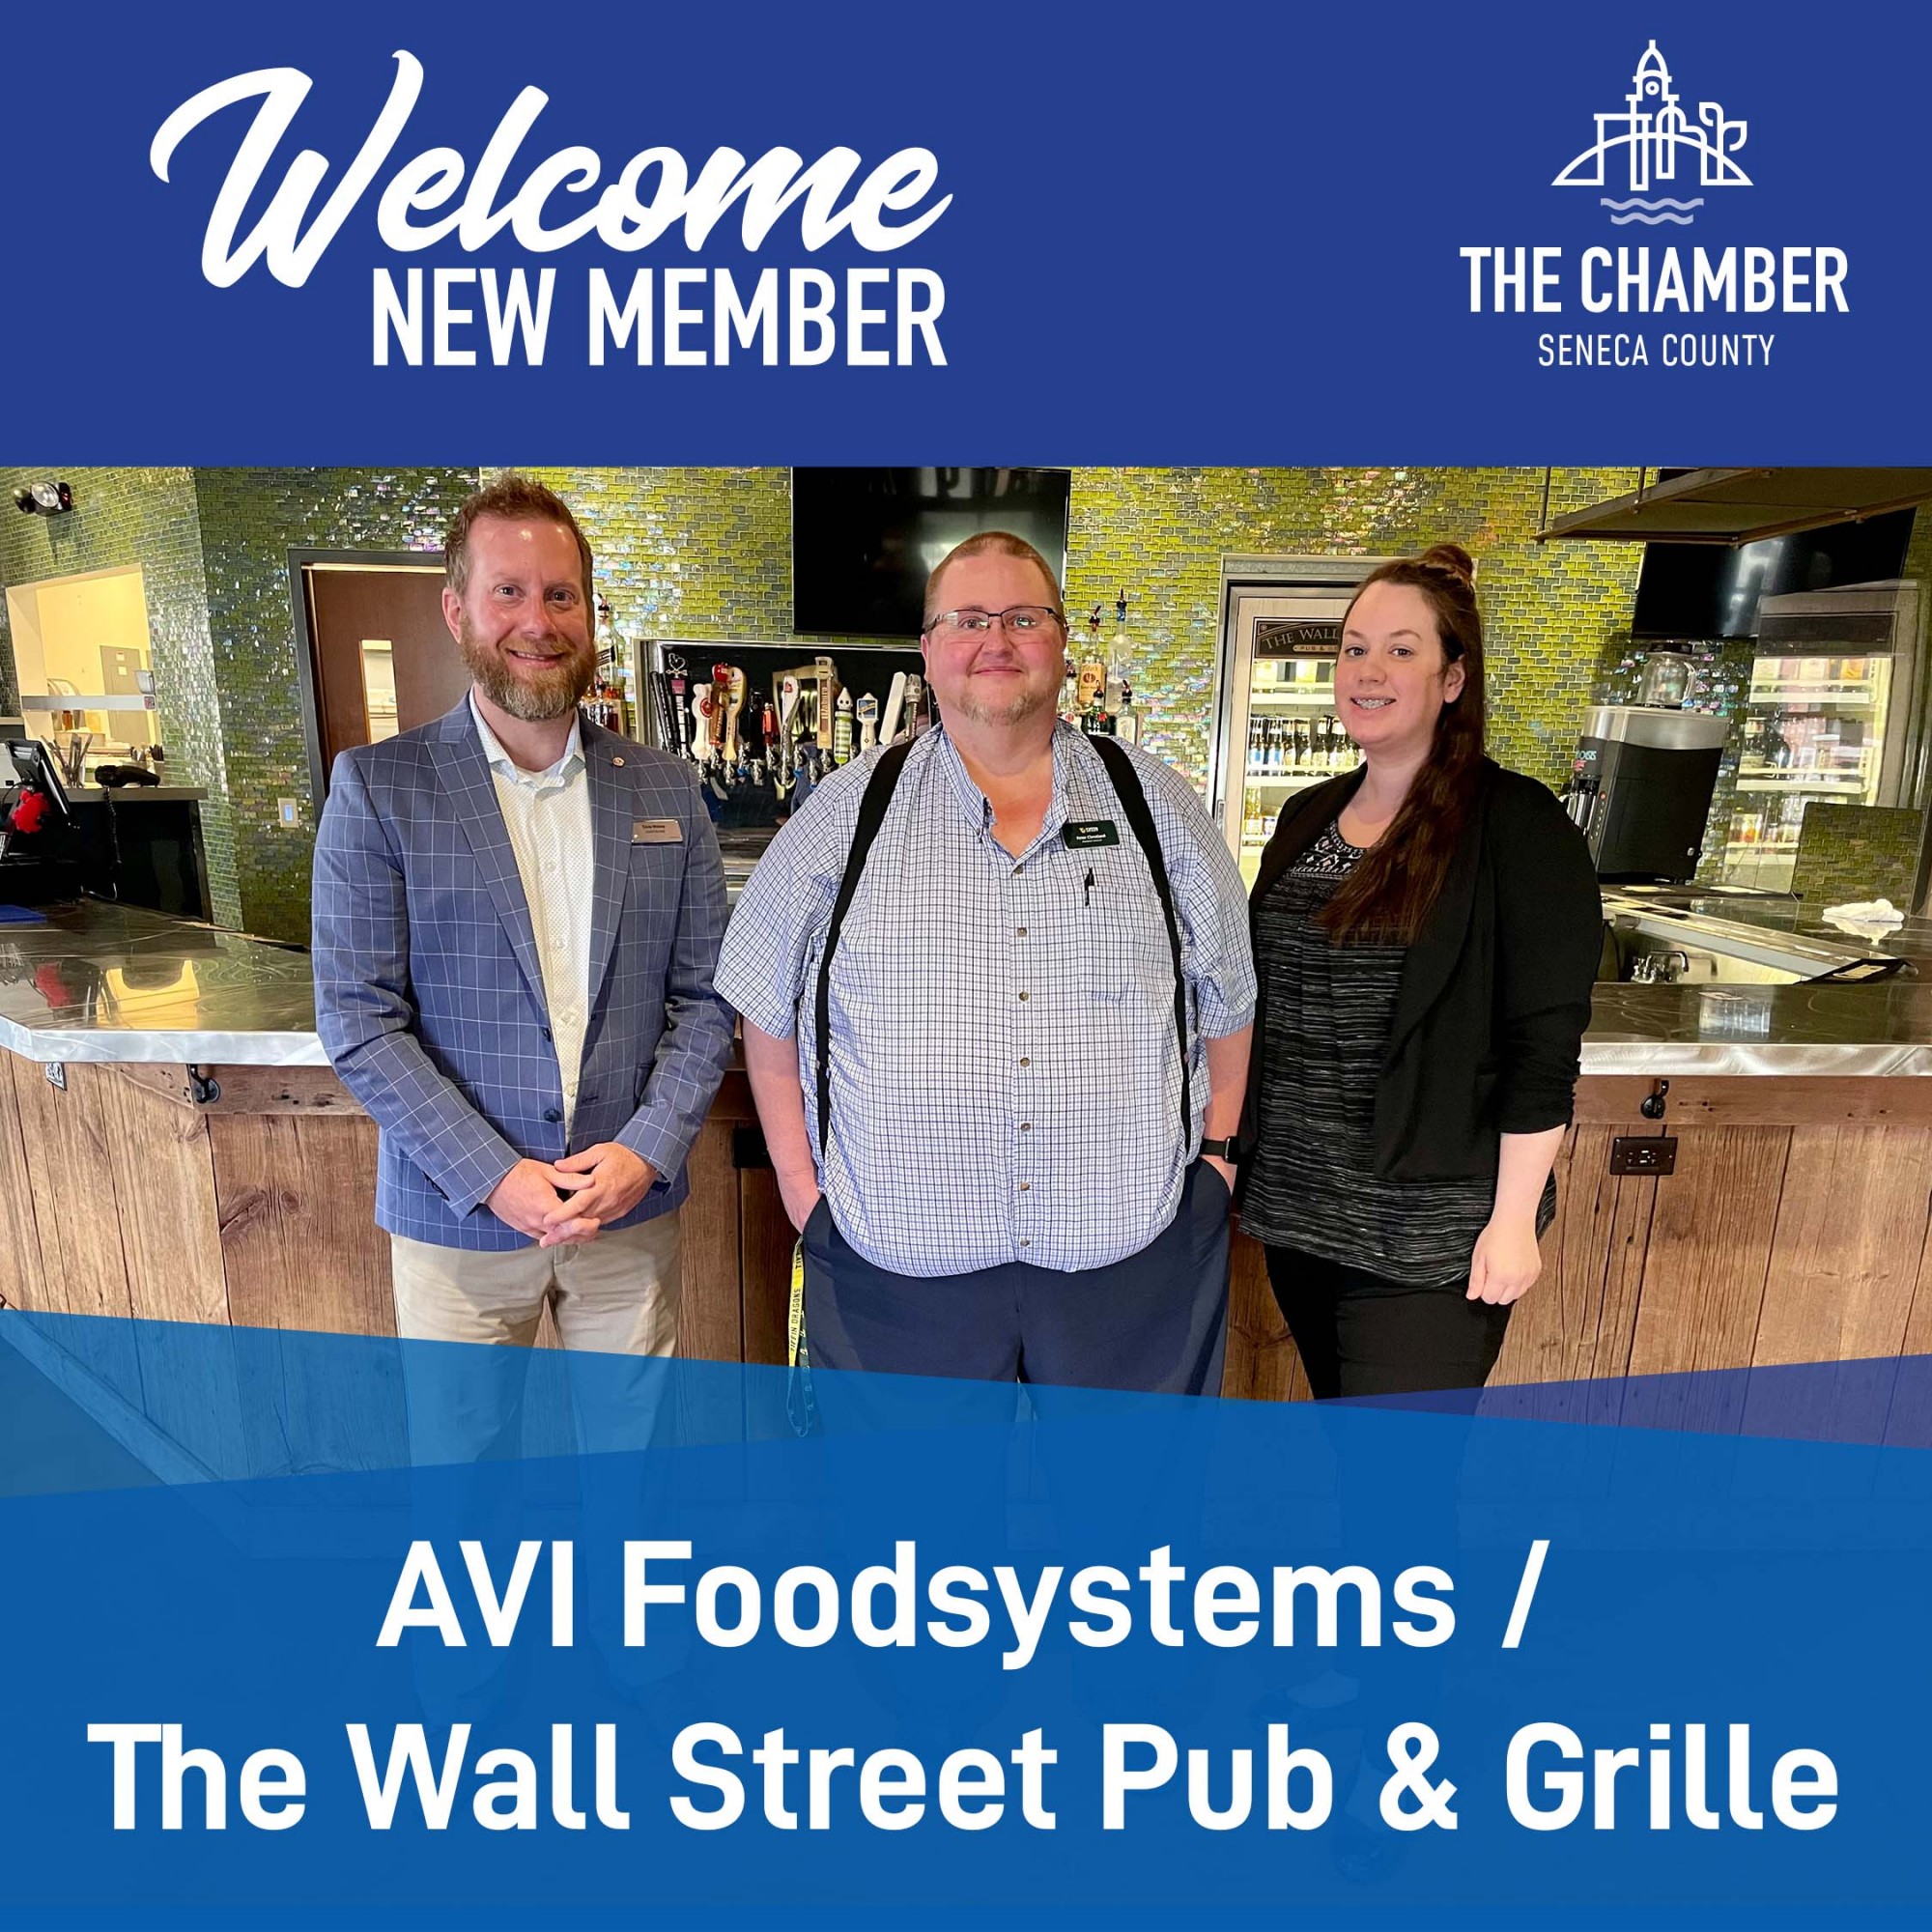 New Member: AVI Foodsystems / The Wall Street Pub & Grille